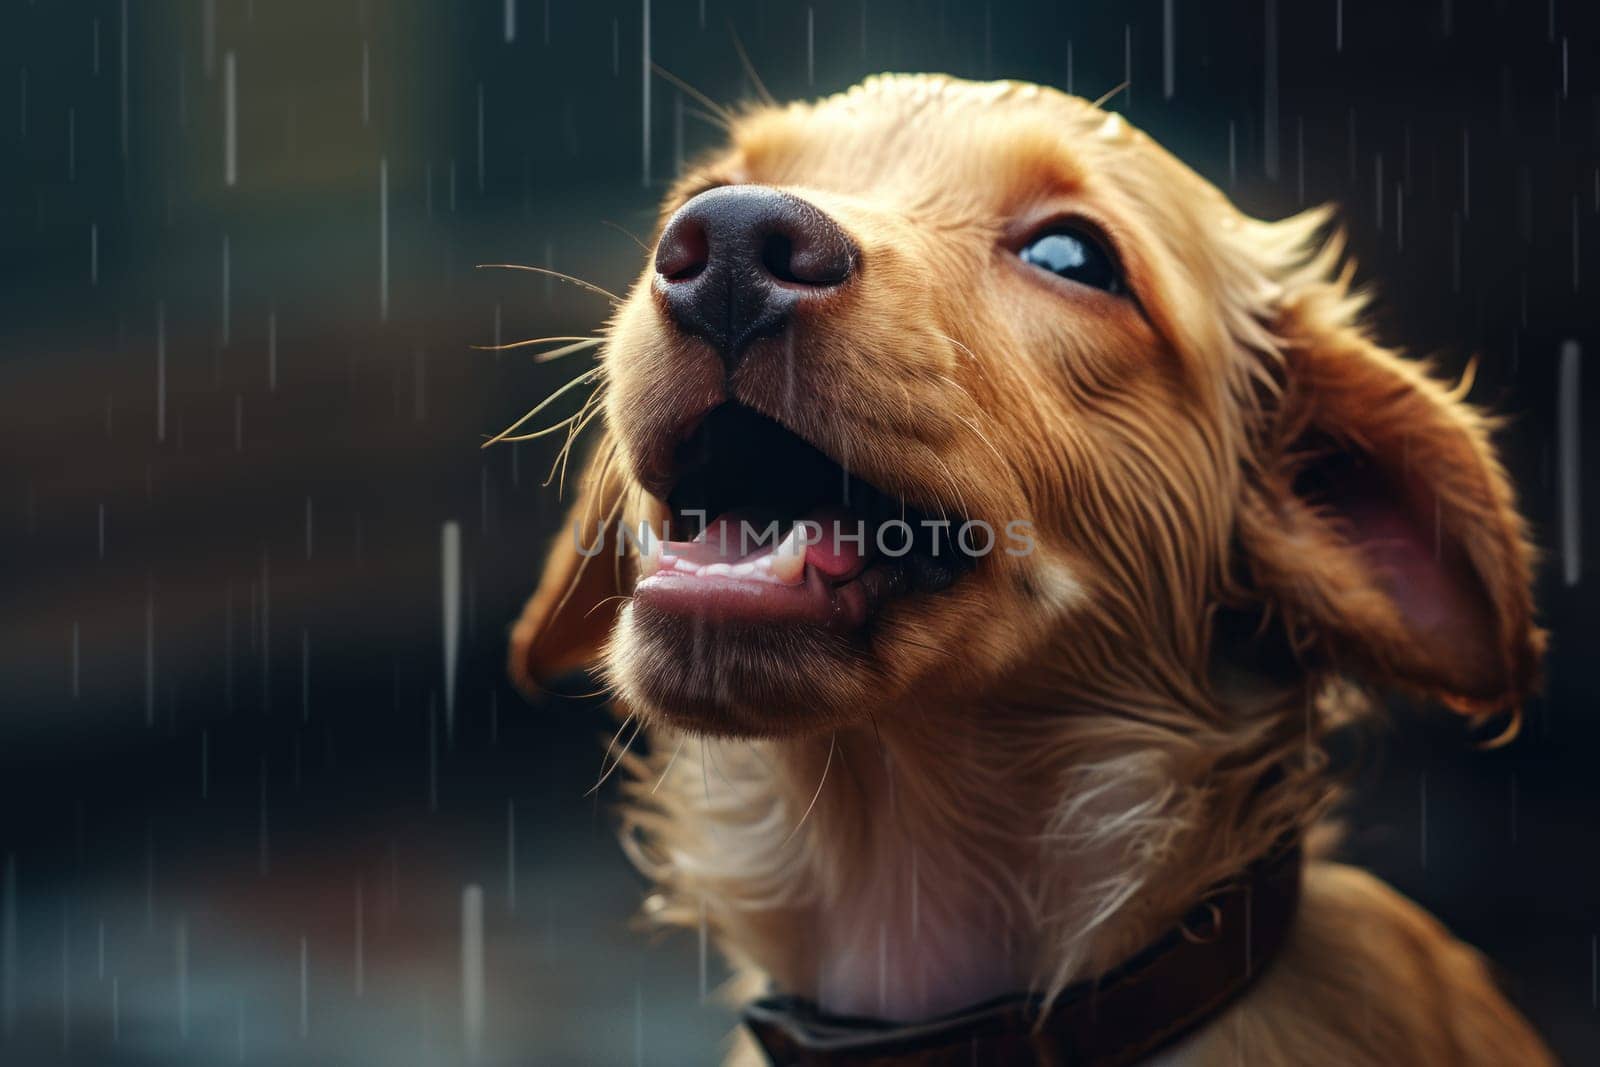 A puppy with floppy ears trying to catch the raindrops with its tongue by nijieimu